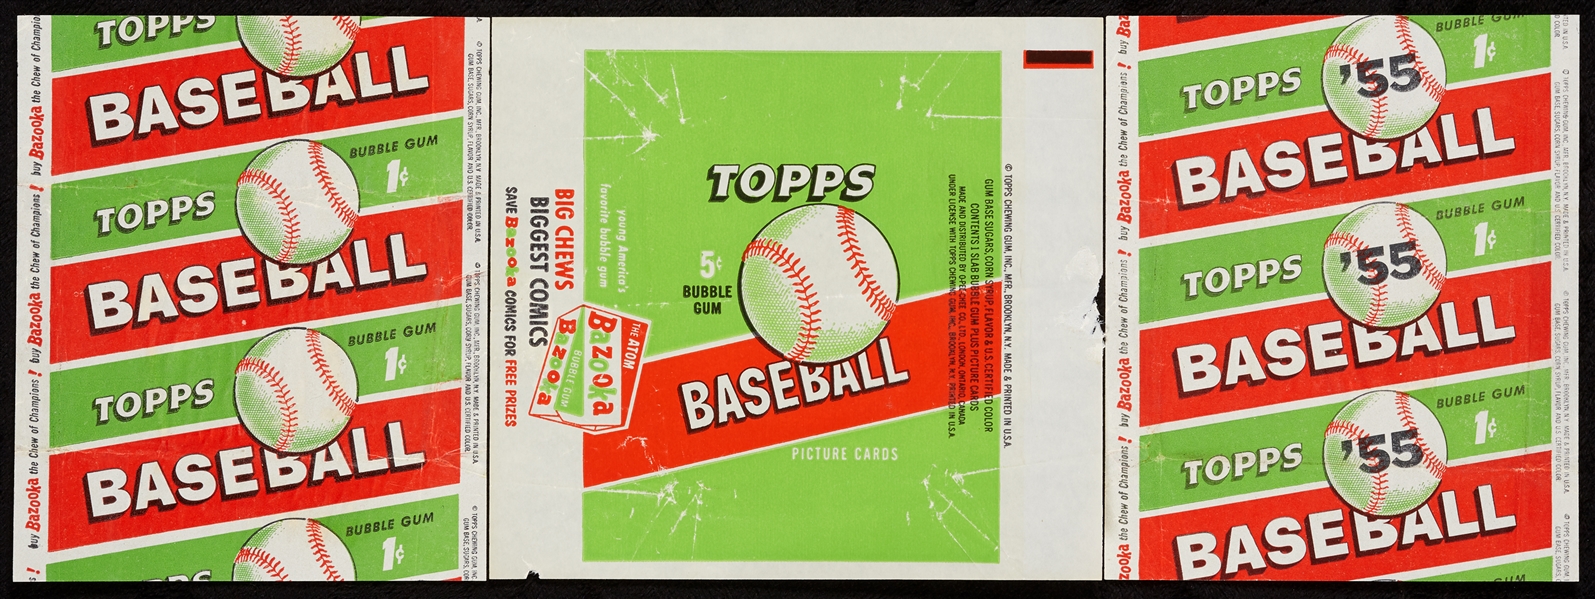 1955 Topps Baseball One and Five-Cent Wrappers (3) 